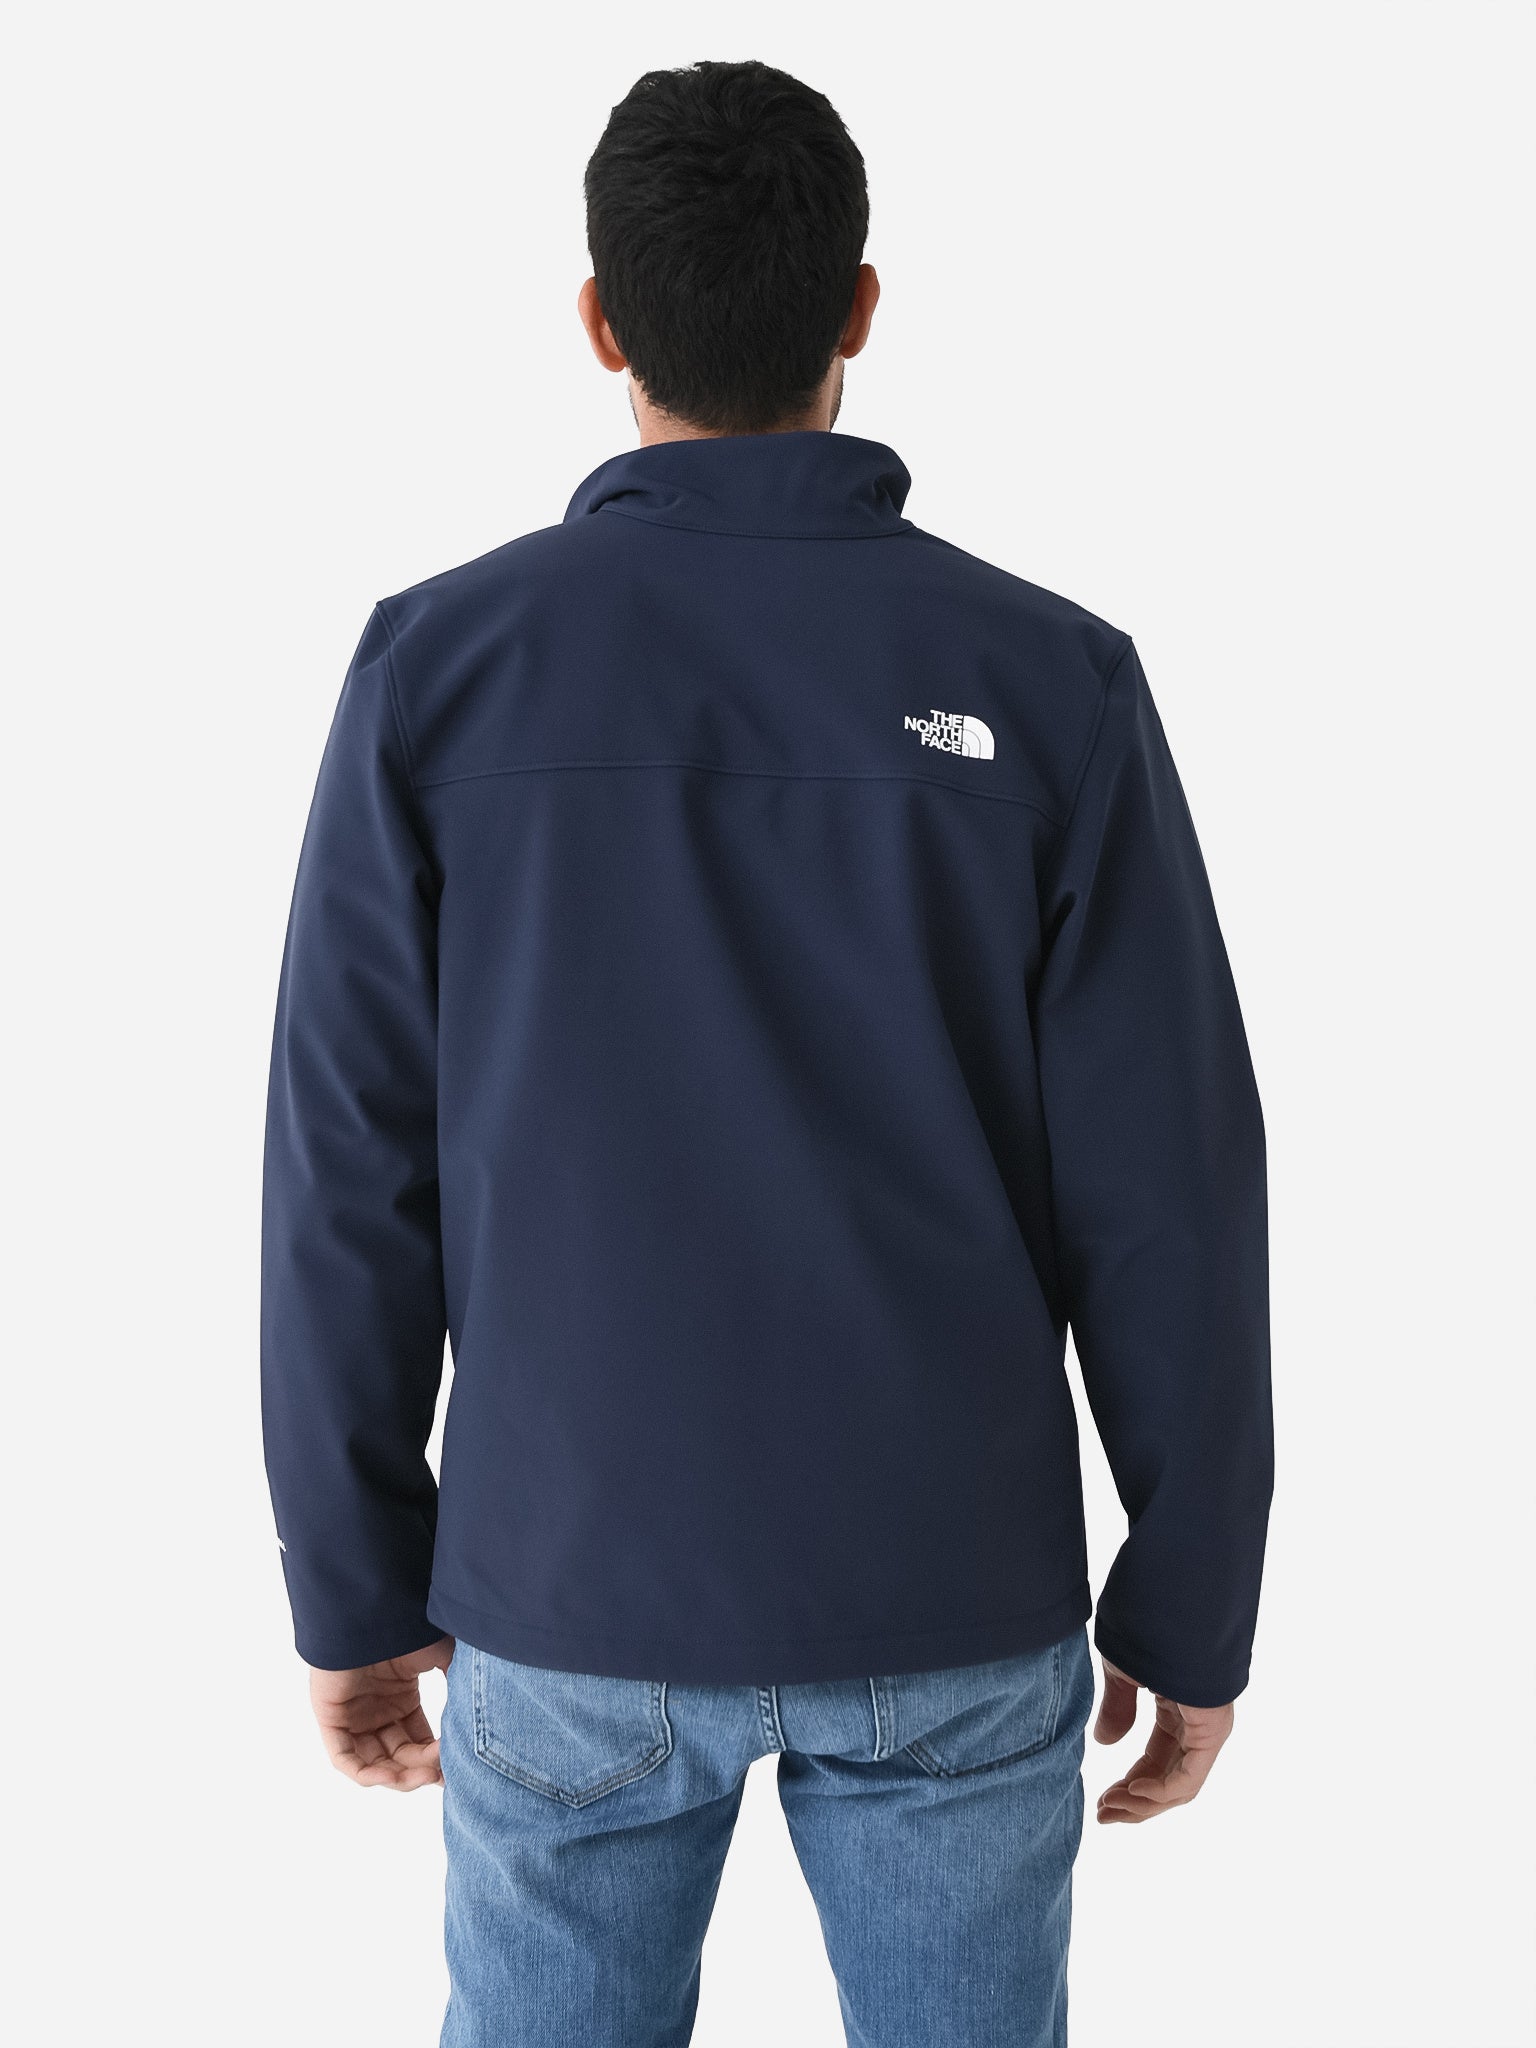 The North Face Men’s Apex Bionic 3 Jacket